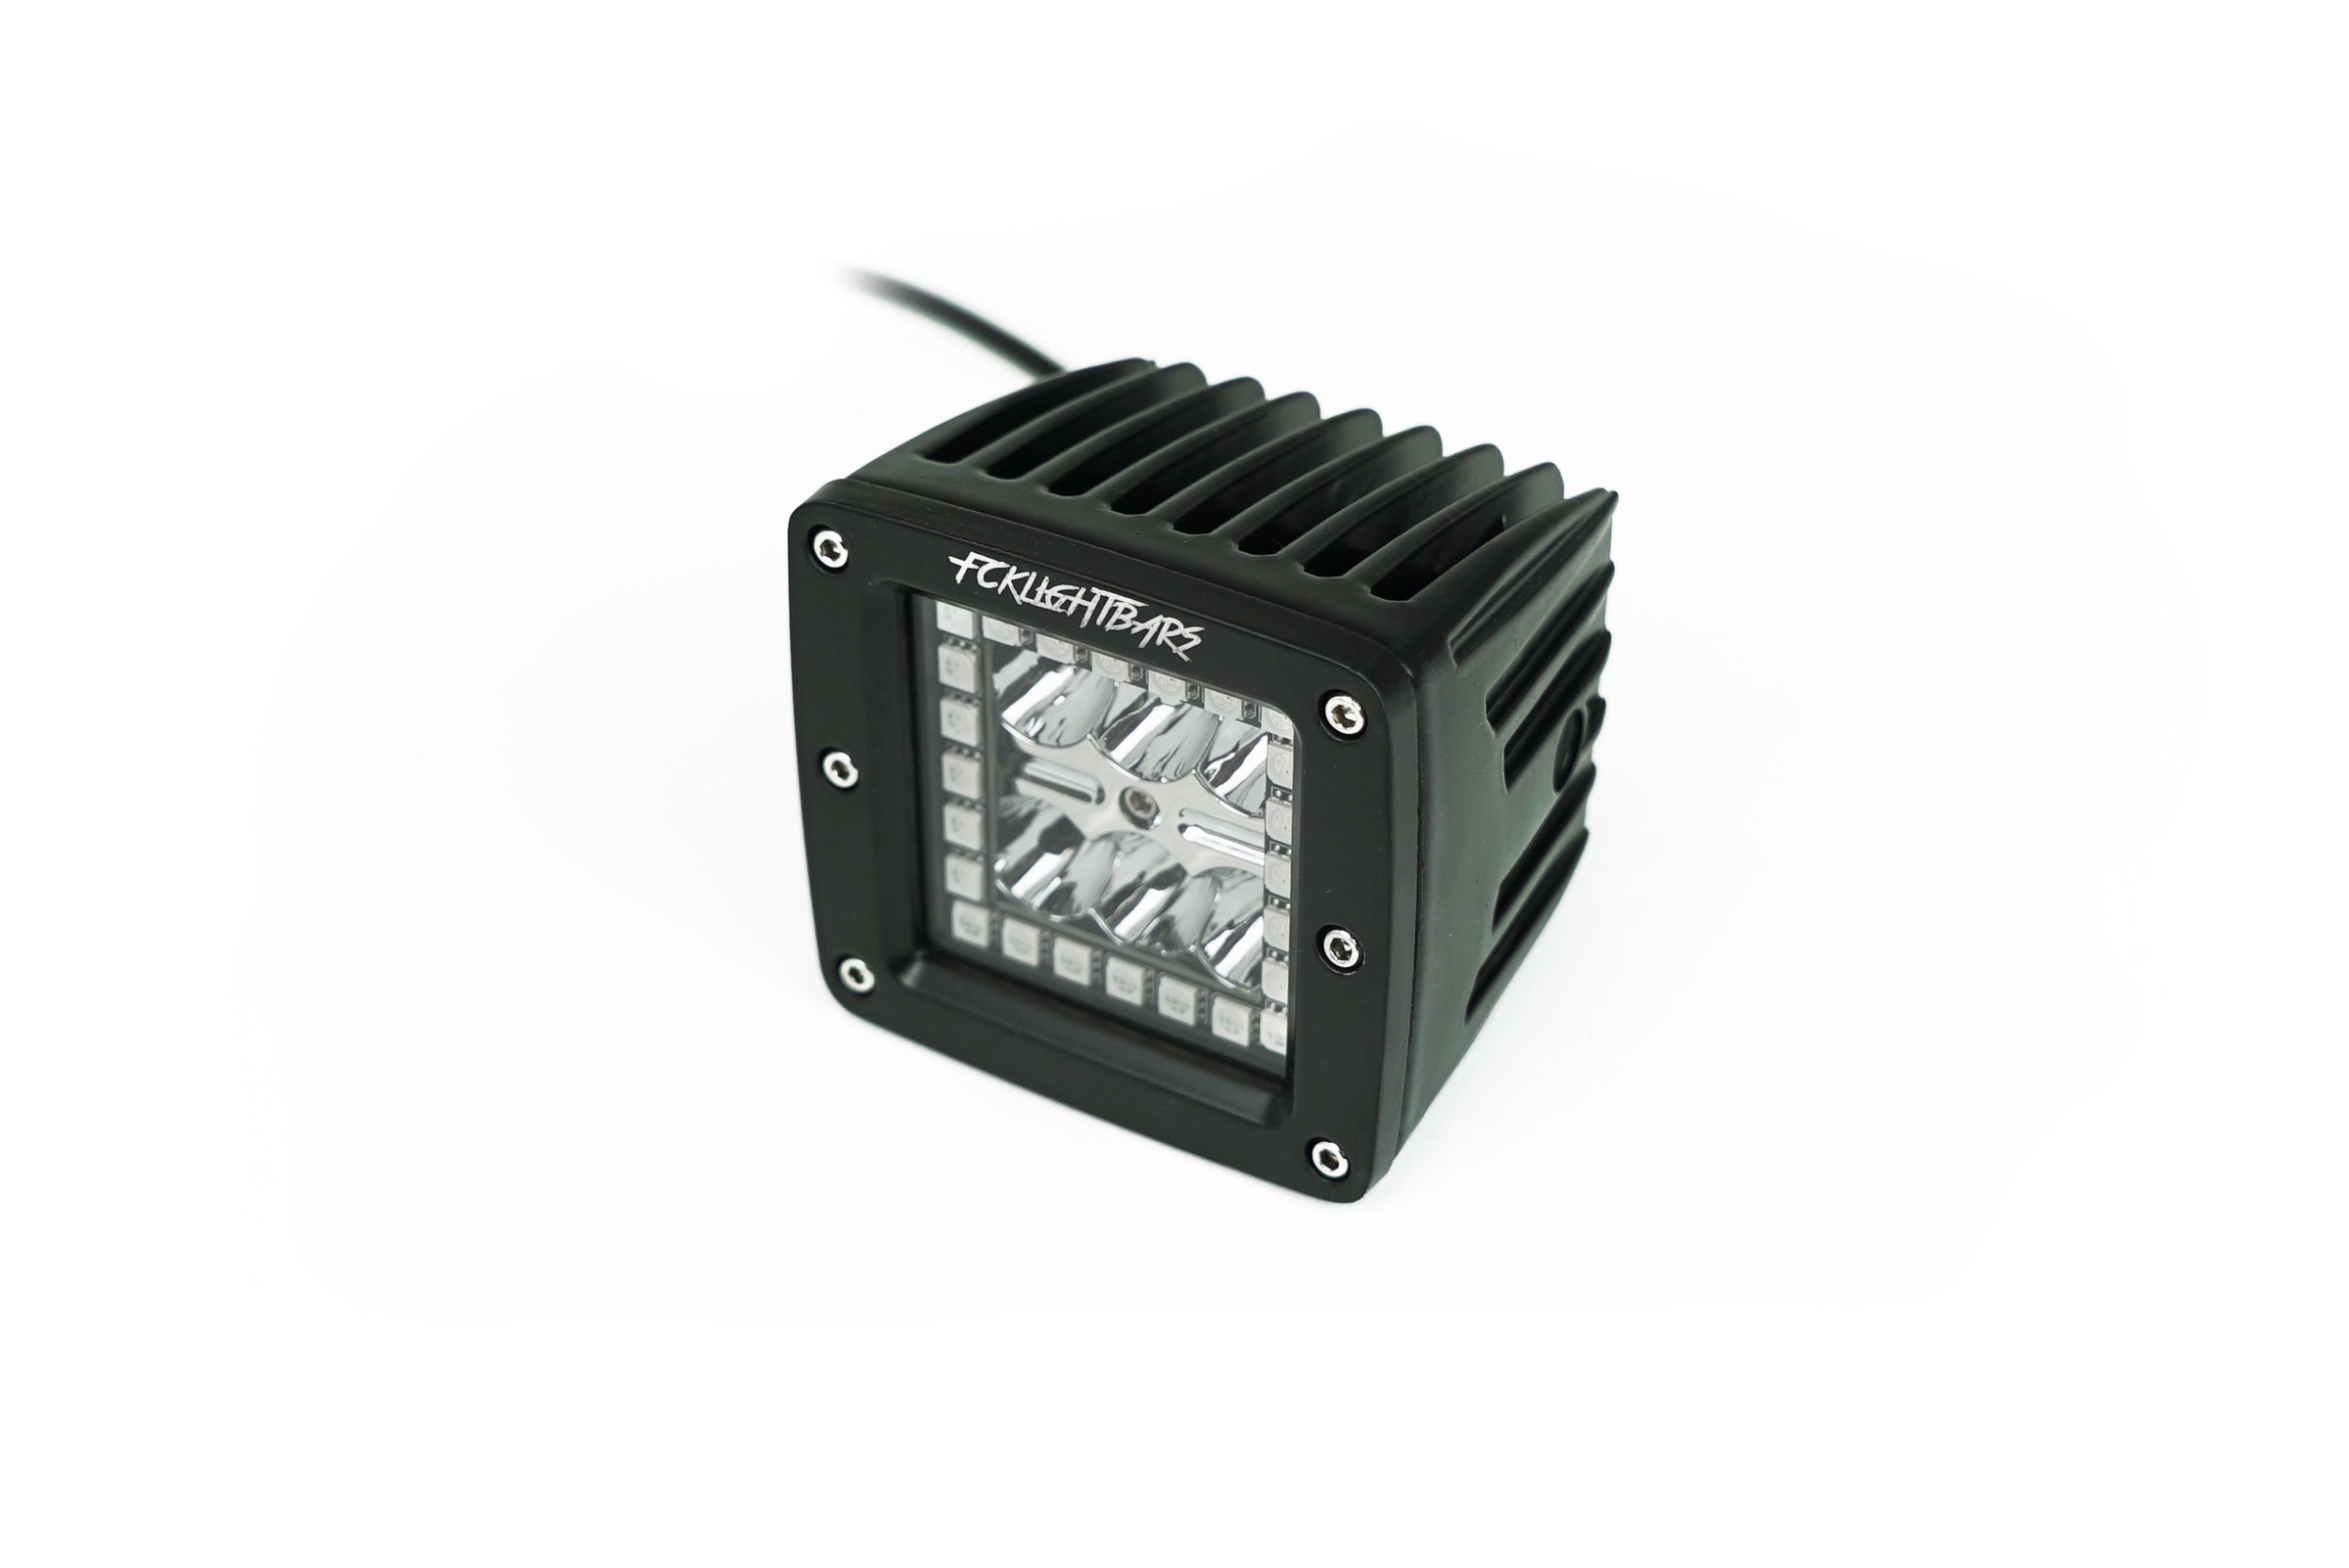 BARRE LEDS 1m 3in1 RGB IP55 - Media diffusion